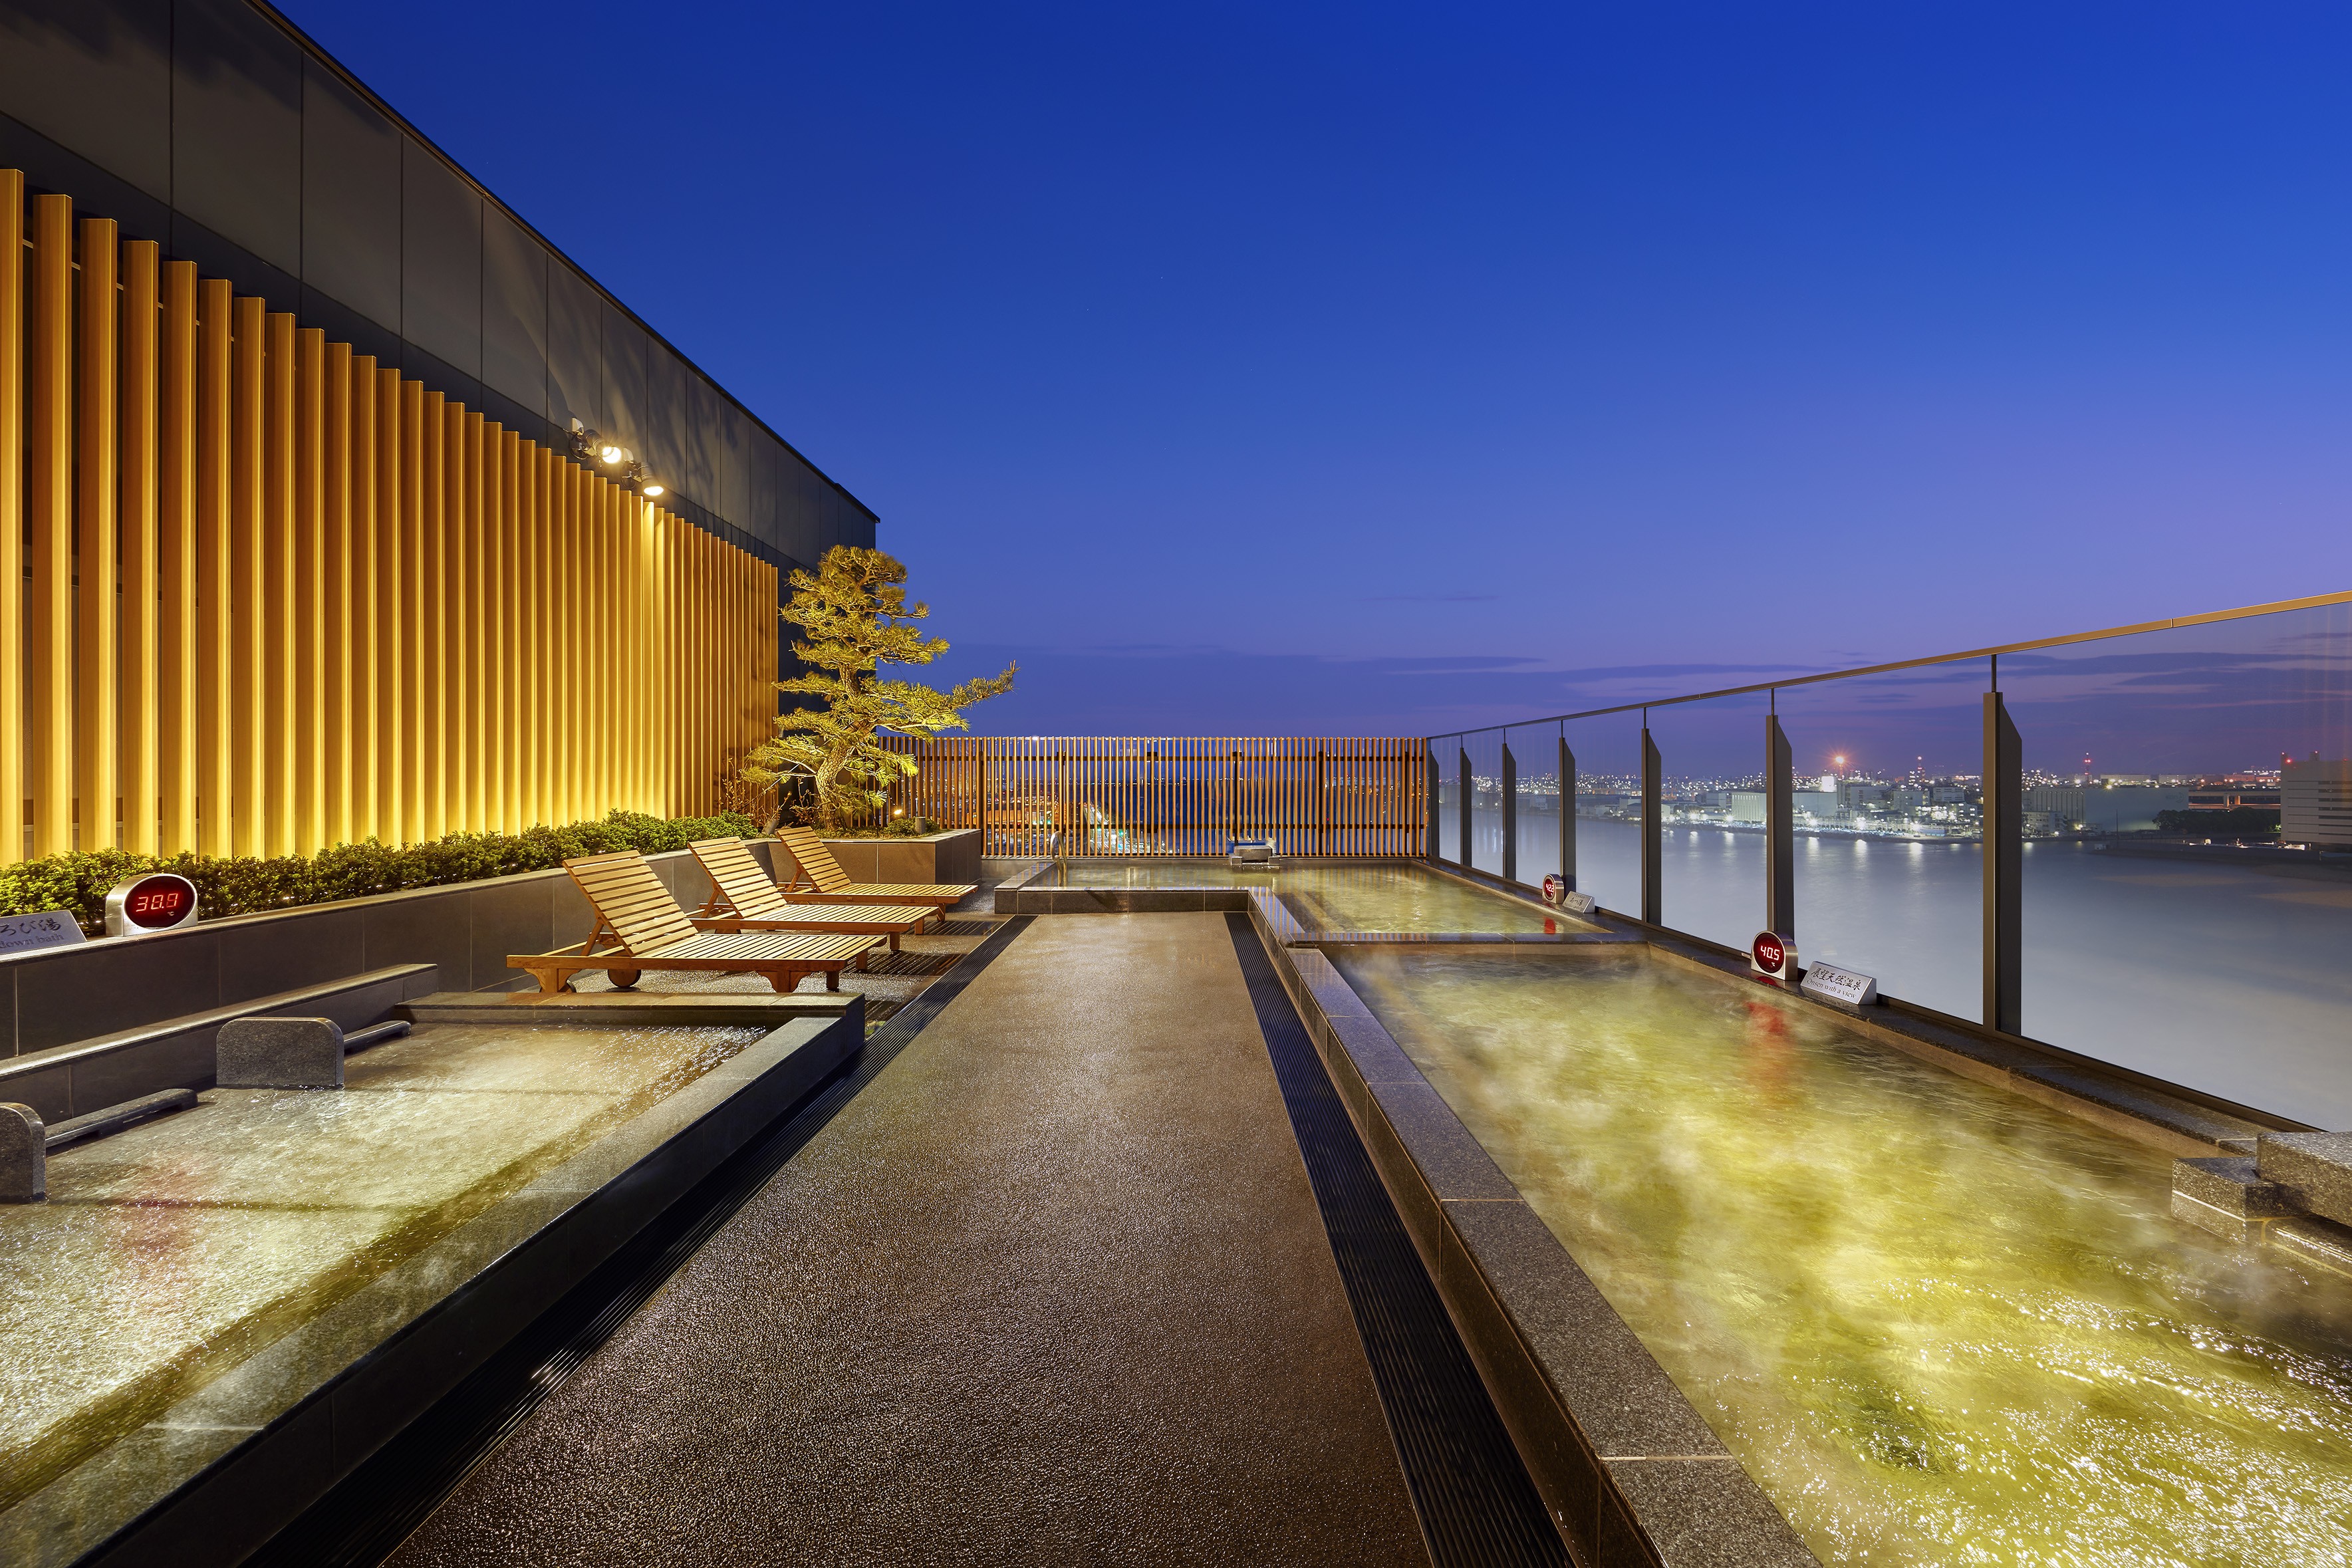 Haneda Airport Garden: Recommended new spot in Tokyo that even has a hot spring with Mt.Fuji view